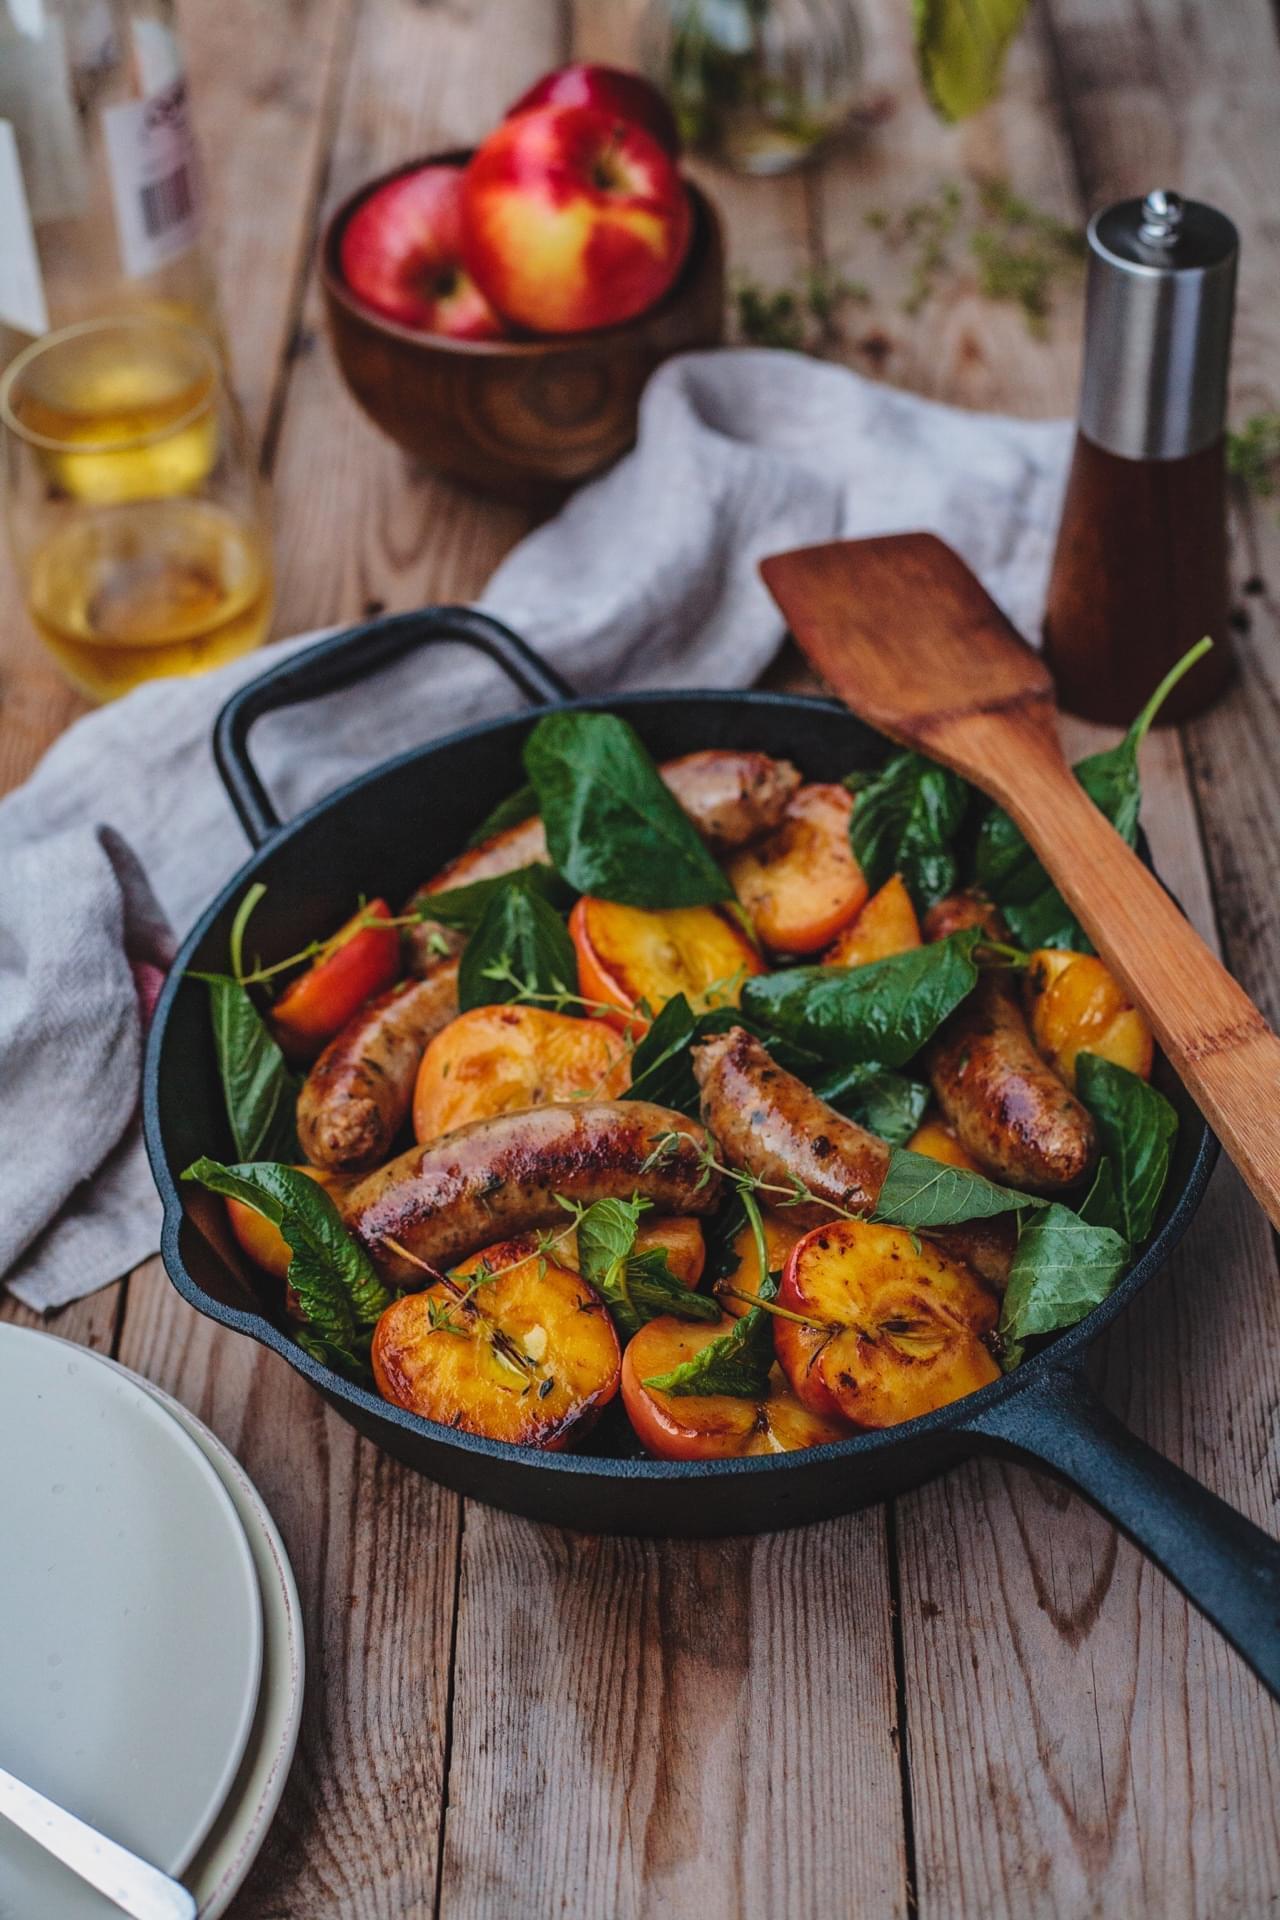 Pan Seared Sausages, Apples With Honey And Greens 